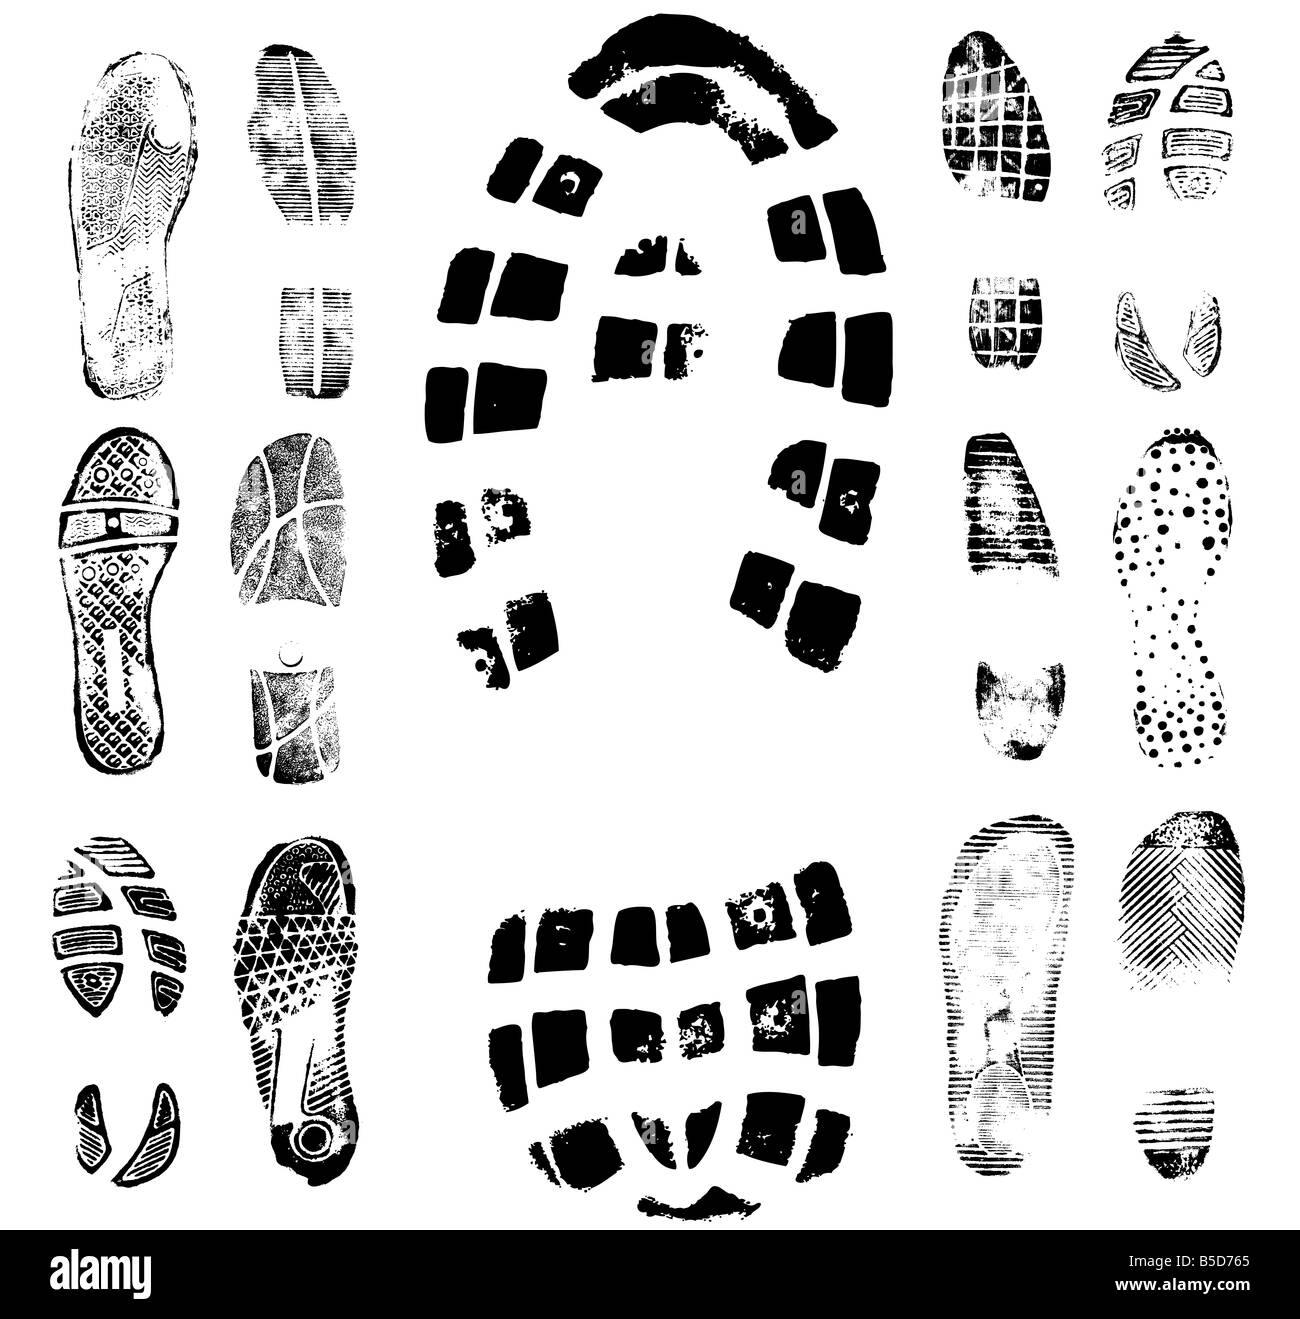 Vector illustration of various footprint shoeprint traces Collection number 2 Stock Photo